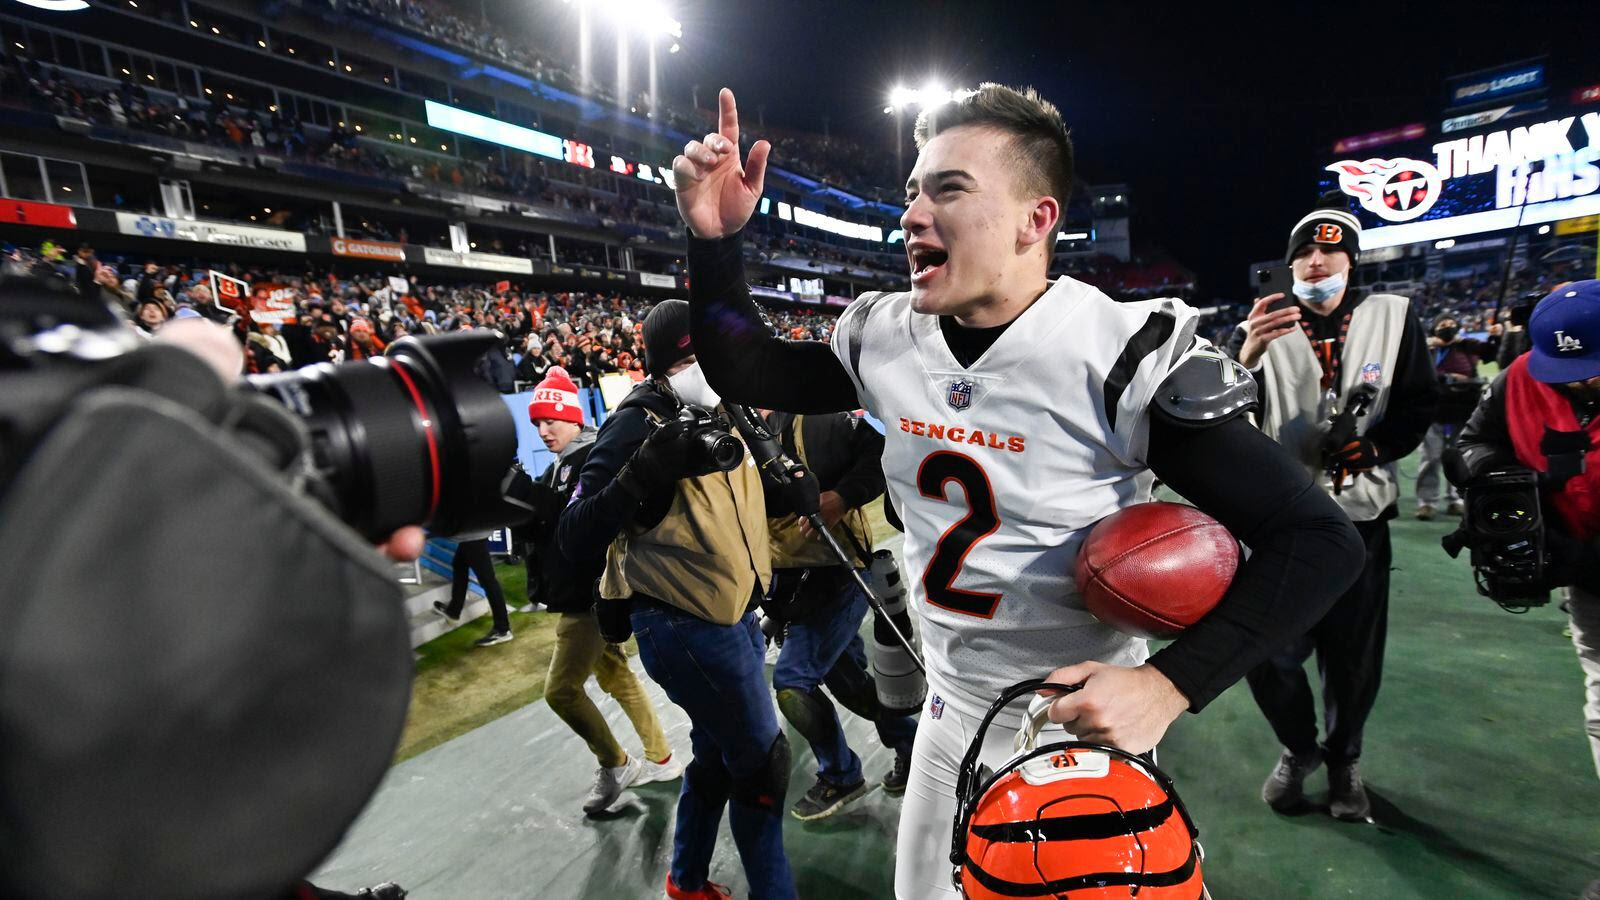 Cincinnati Bengals kicker Evan McPherson celebrates his game-winning field goal against the Tennessee Titans after an NFL division round playoff game last Saturday.